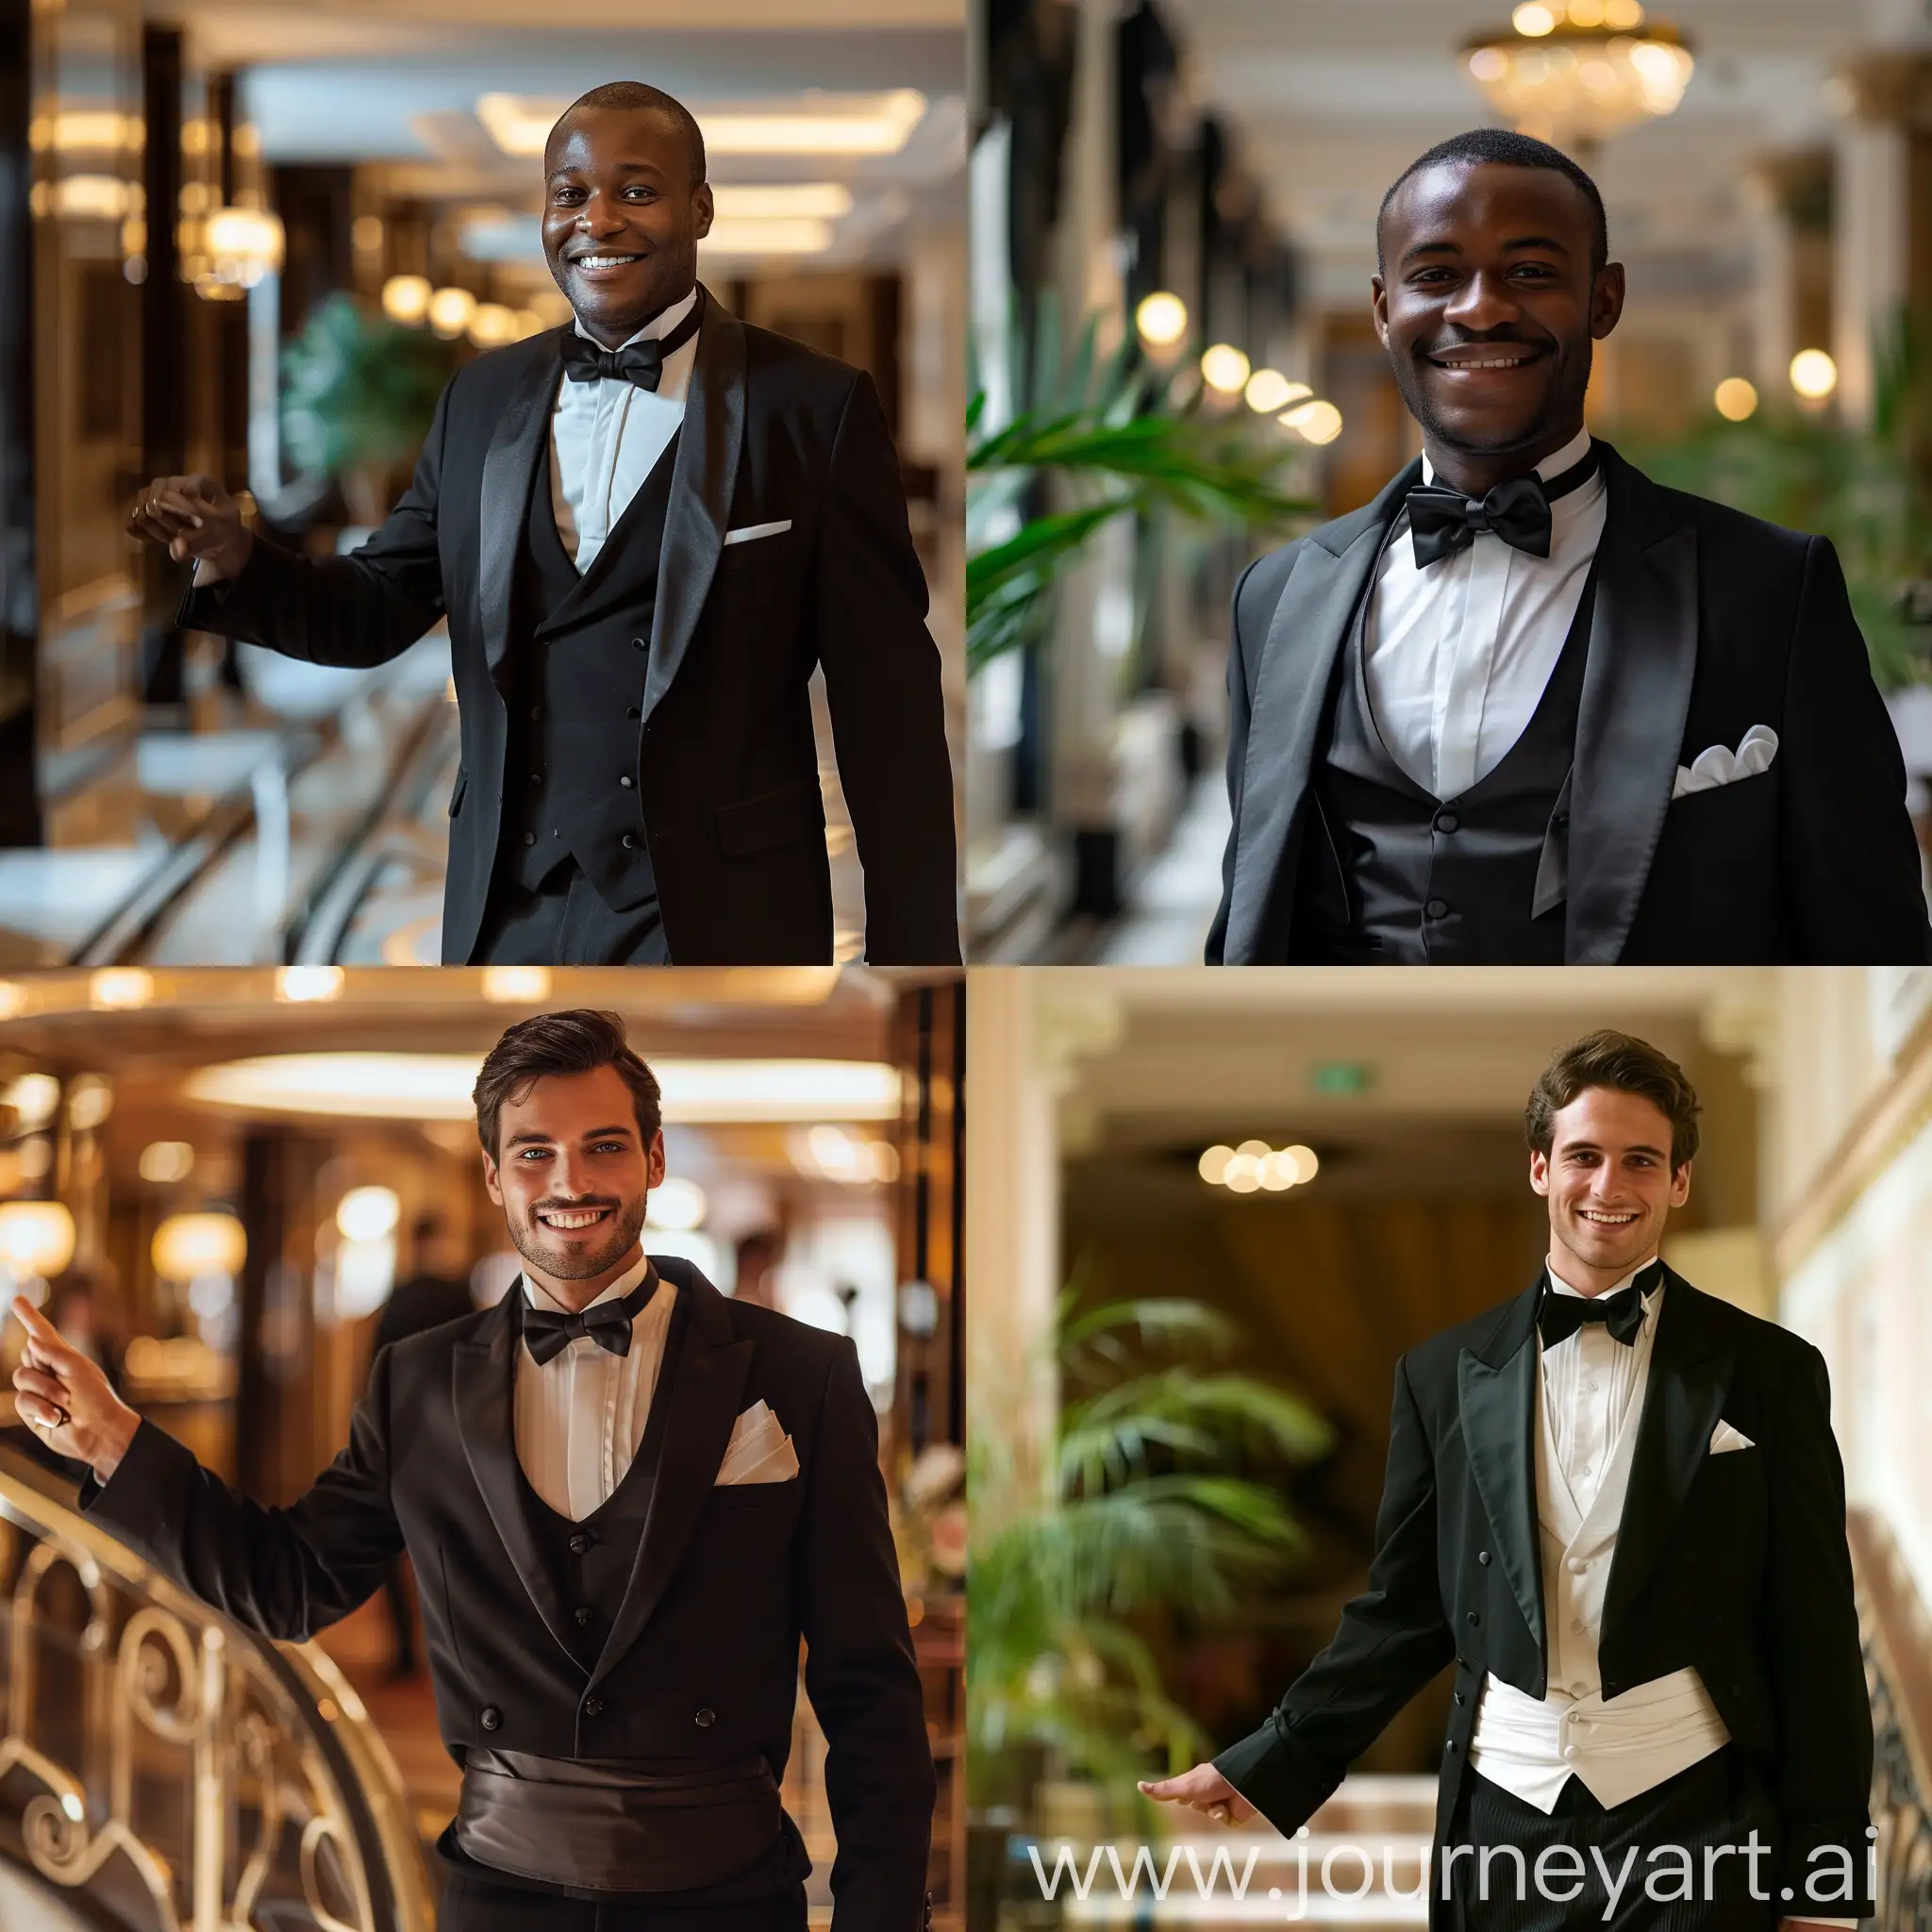 Welcoming-Butler-Guiding-Guests-with-a-Friendly-Smile